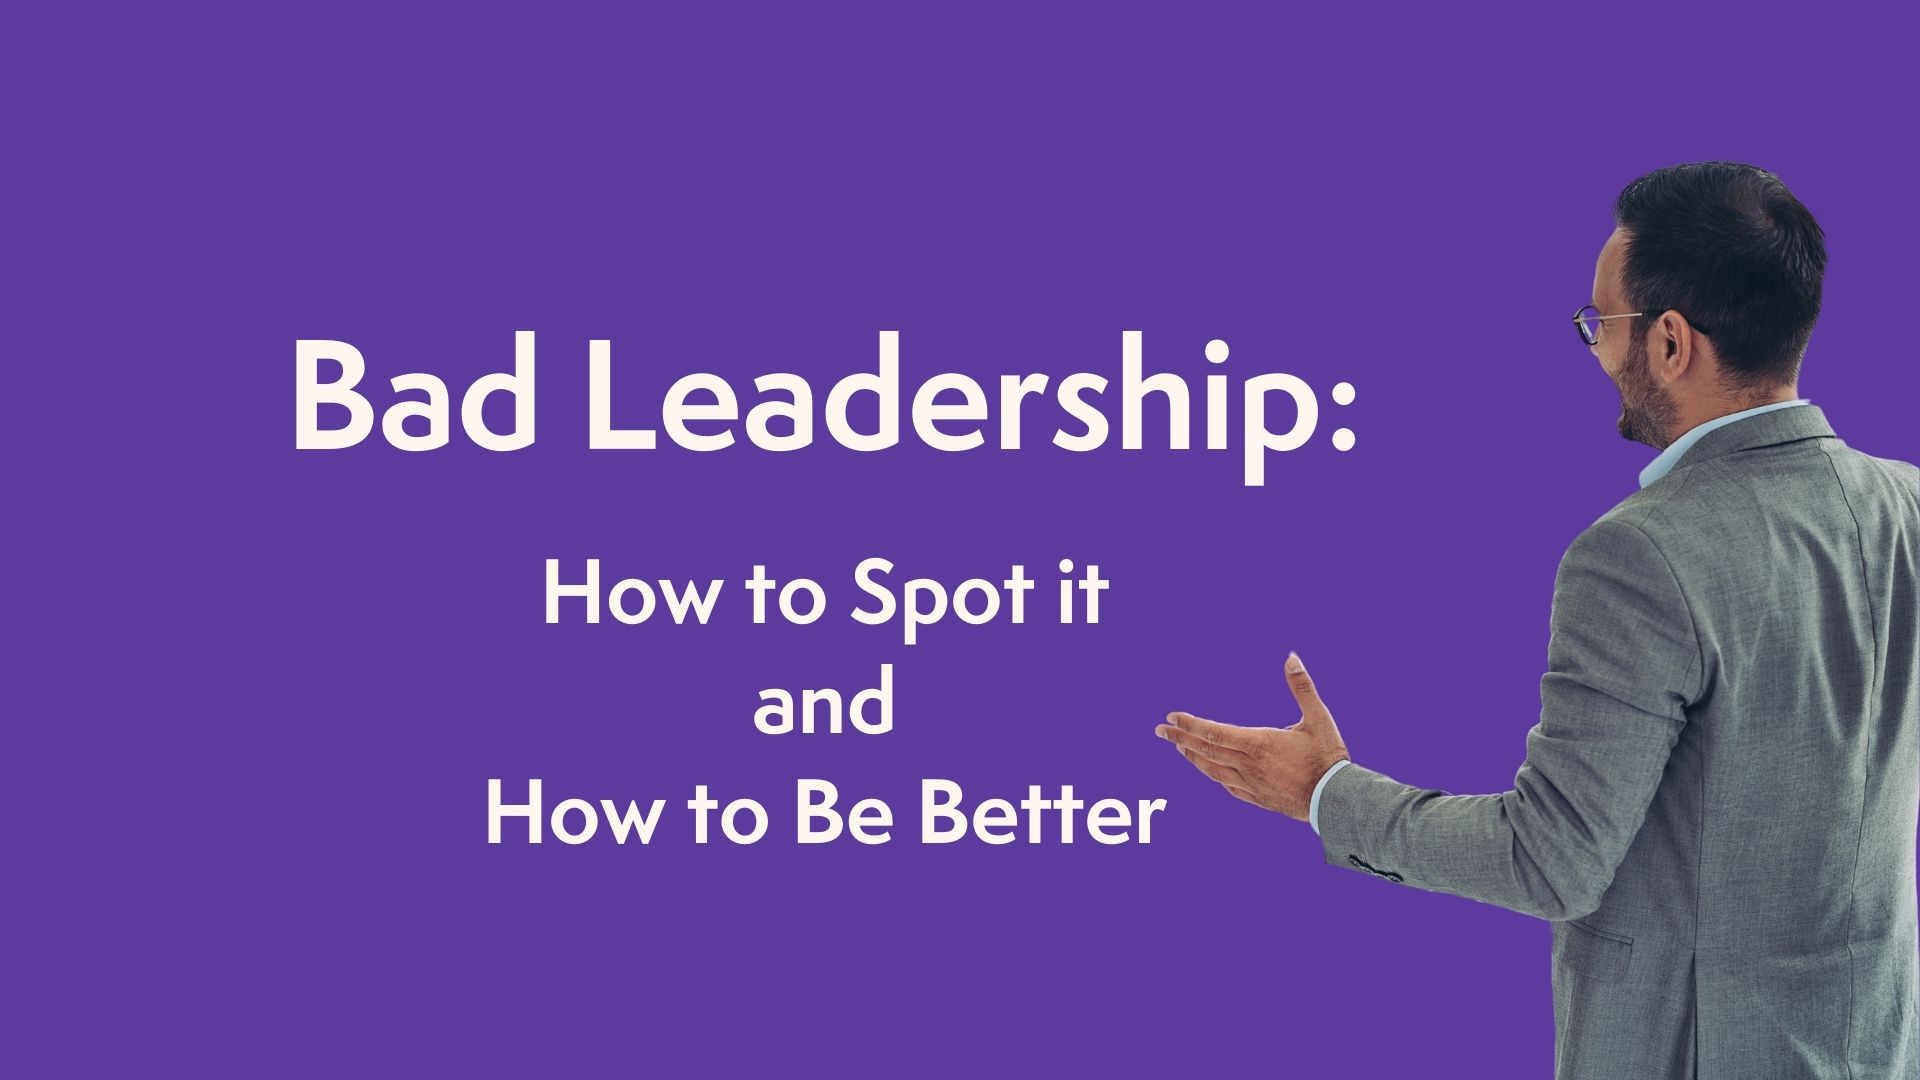 Bad Leadership: How to Spot It, and How to Be Better